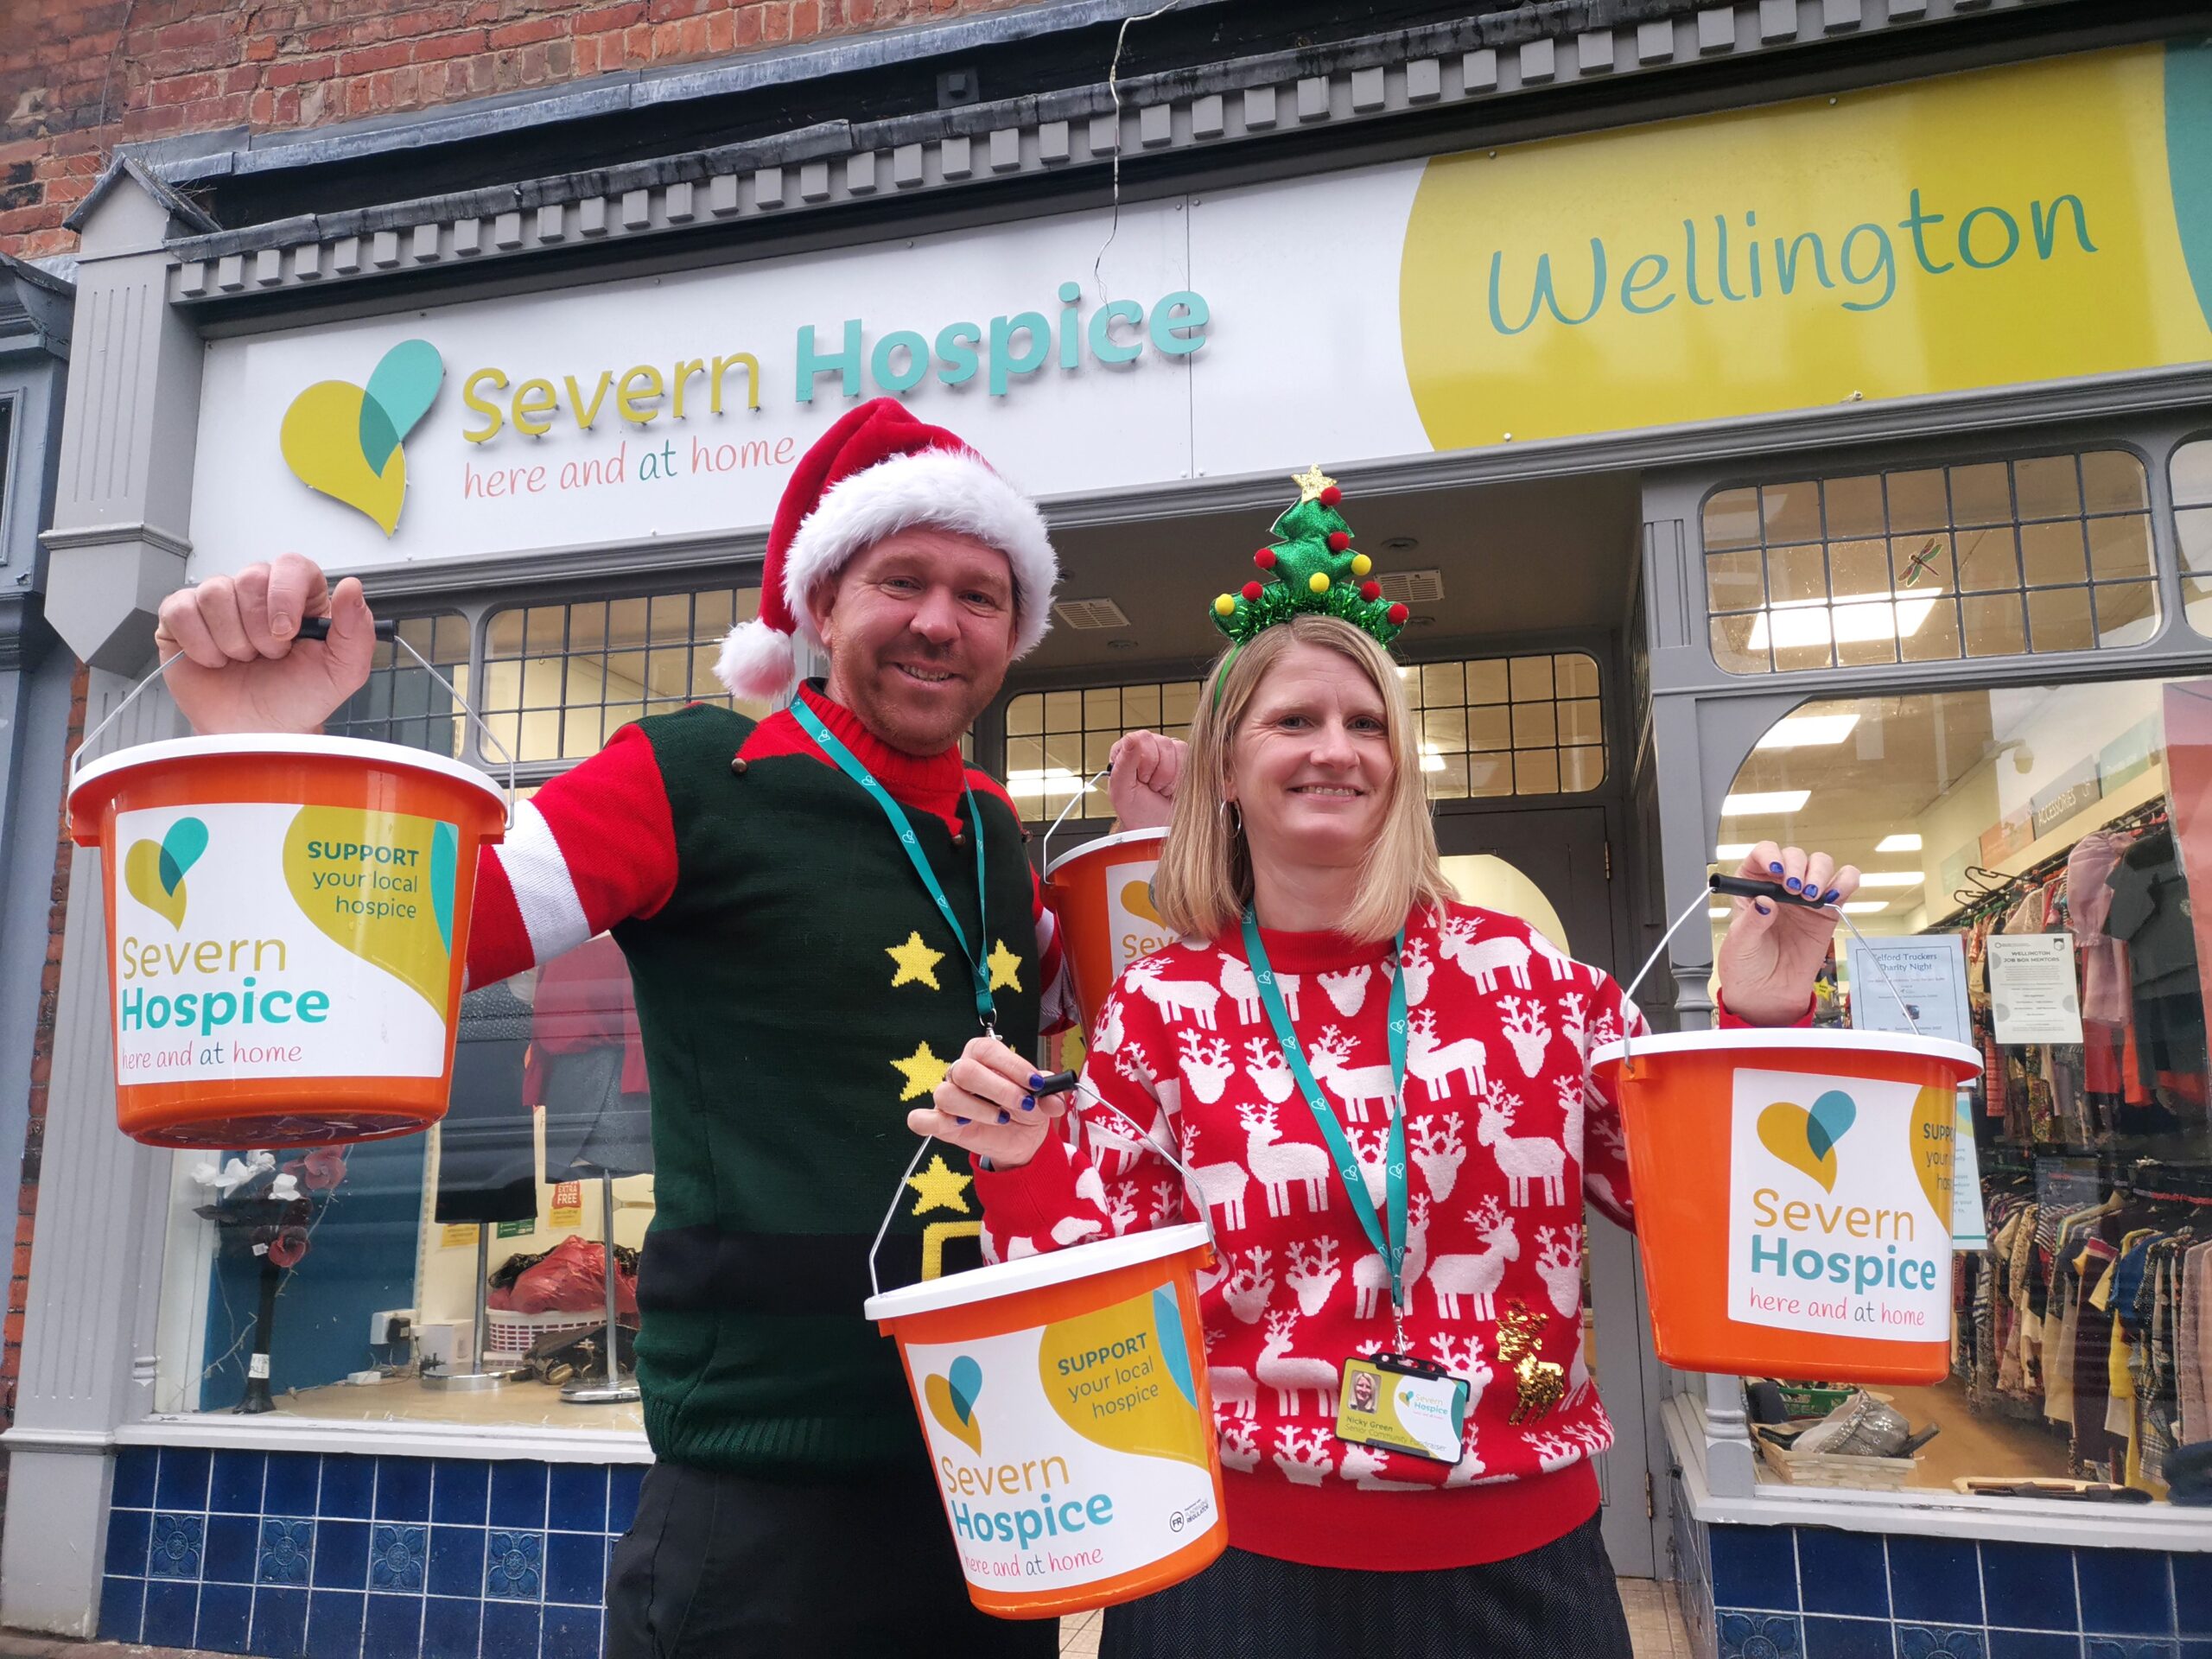 Phil and Nicky, Severn Hospice Community Fundraisers outside the Severn Hospice Wellington shop holding collection buckets